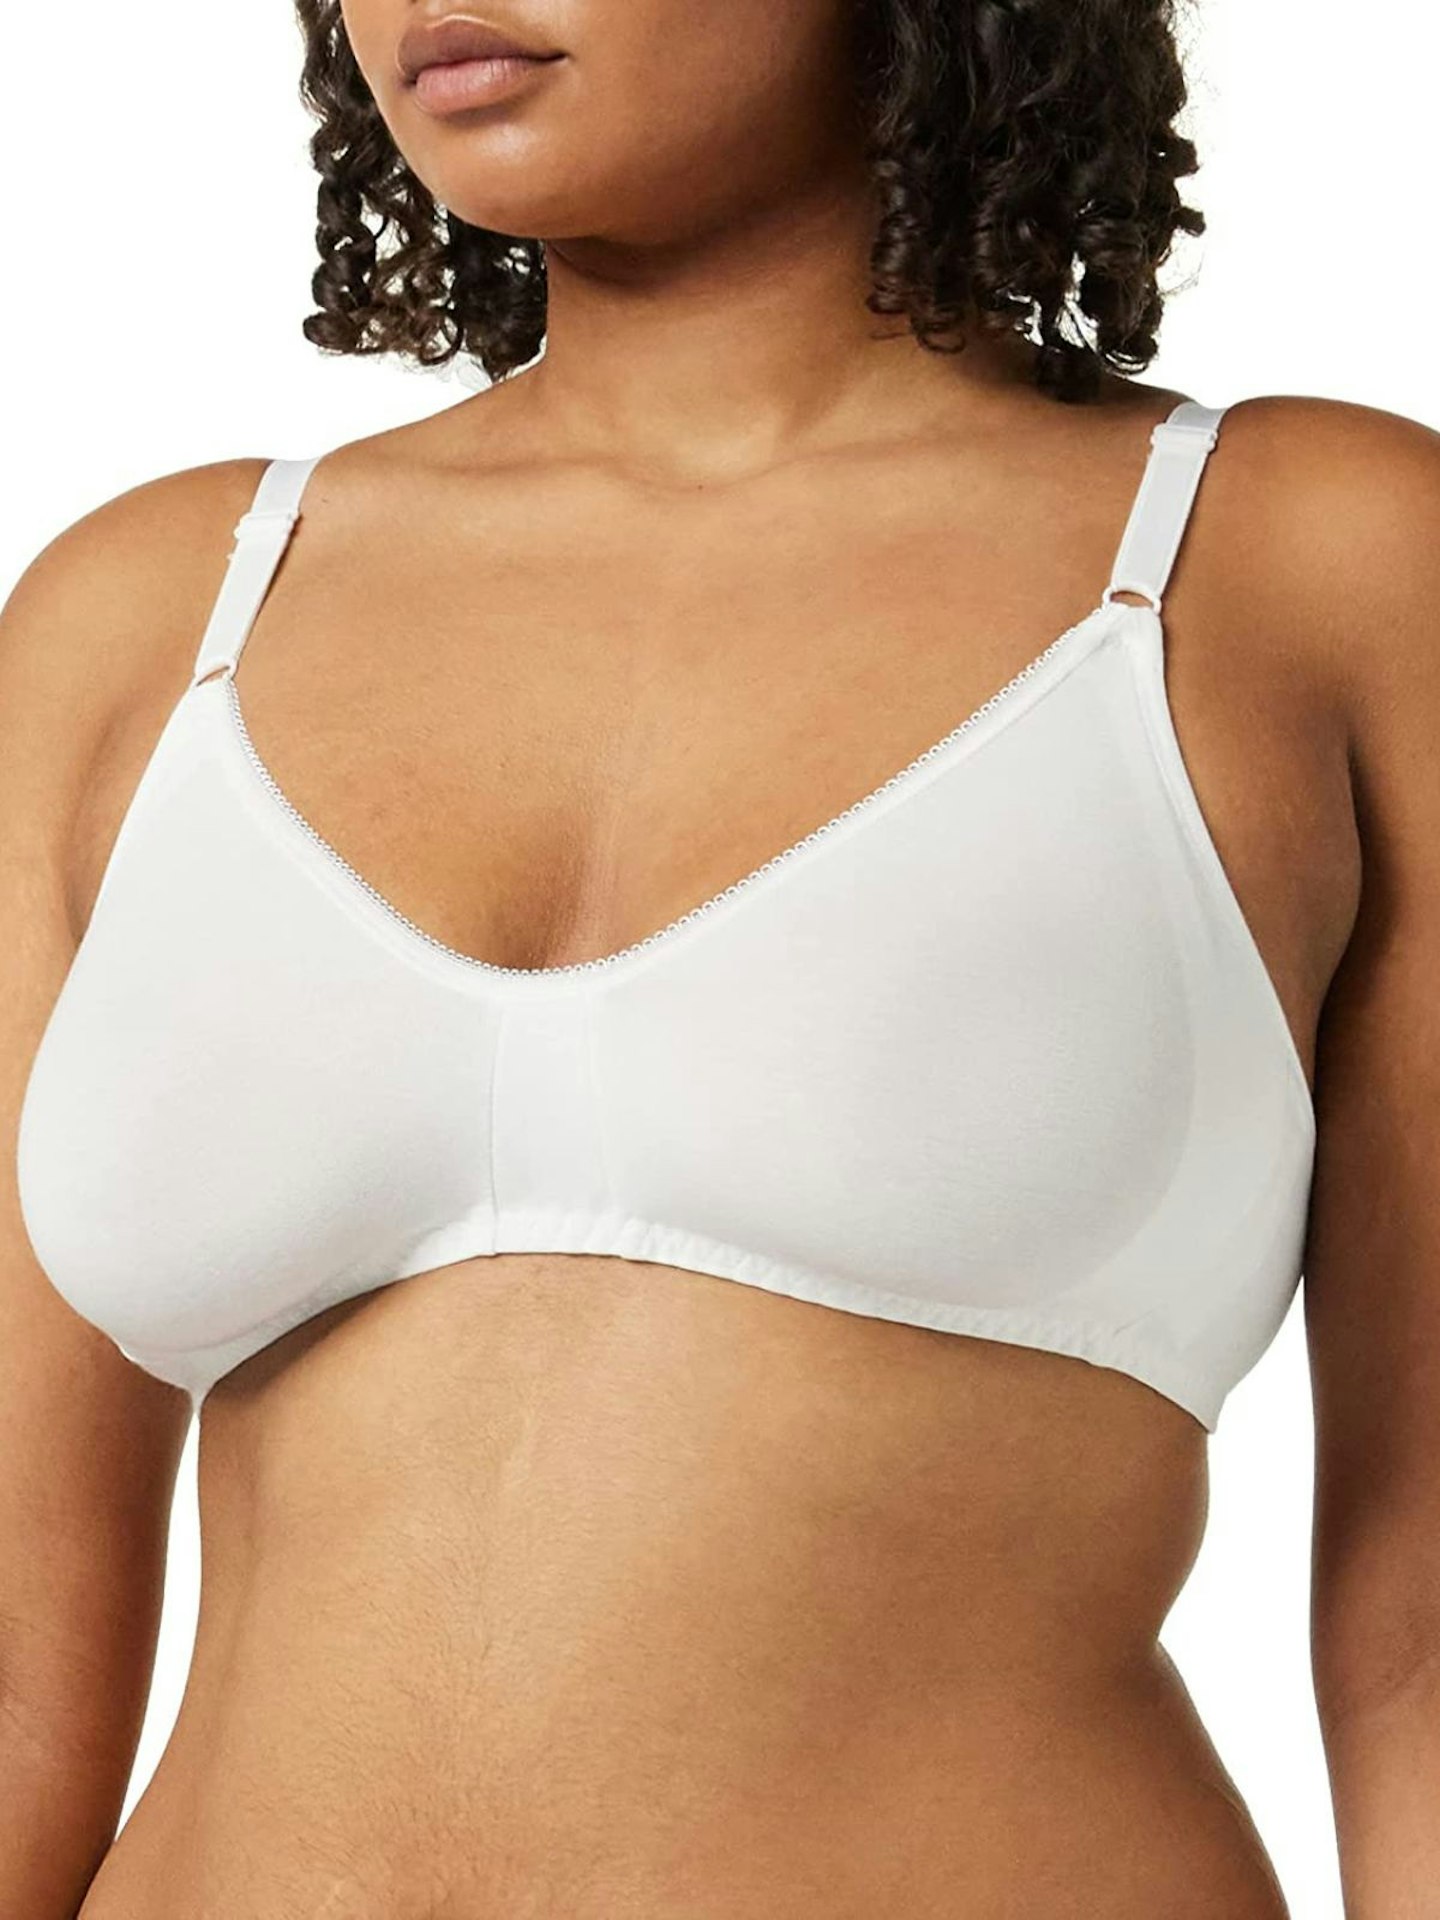 Fashion Hacks: Turn Your Convertible Bra into a Strapless Wonder! #shorts 